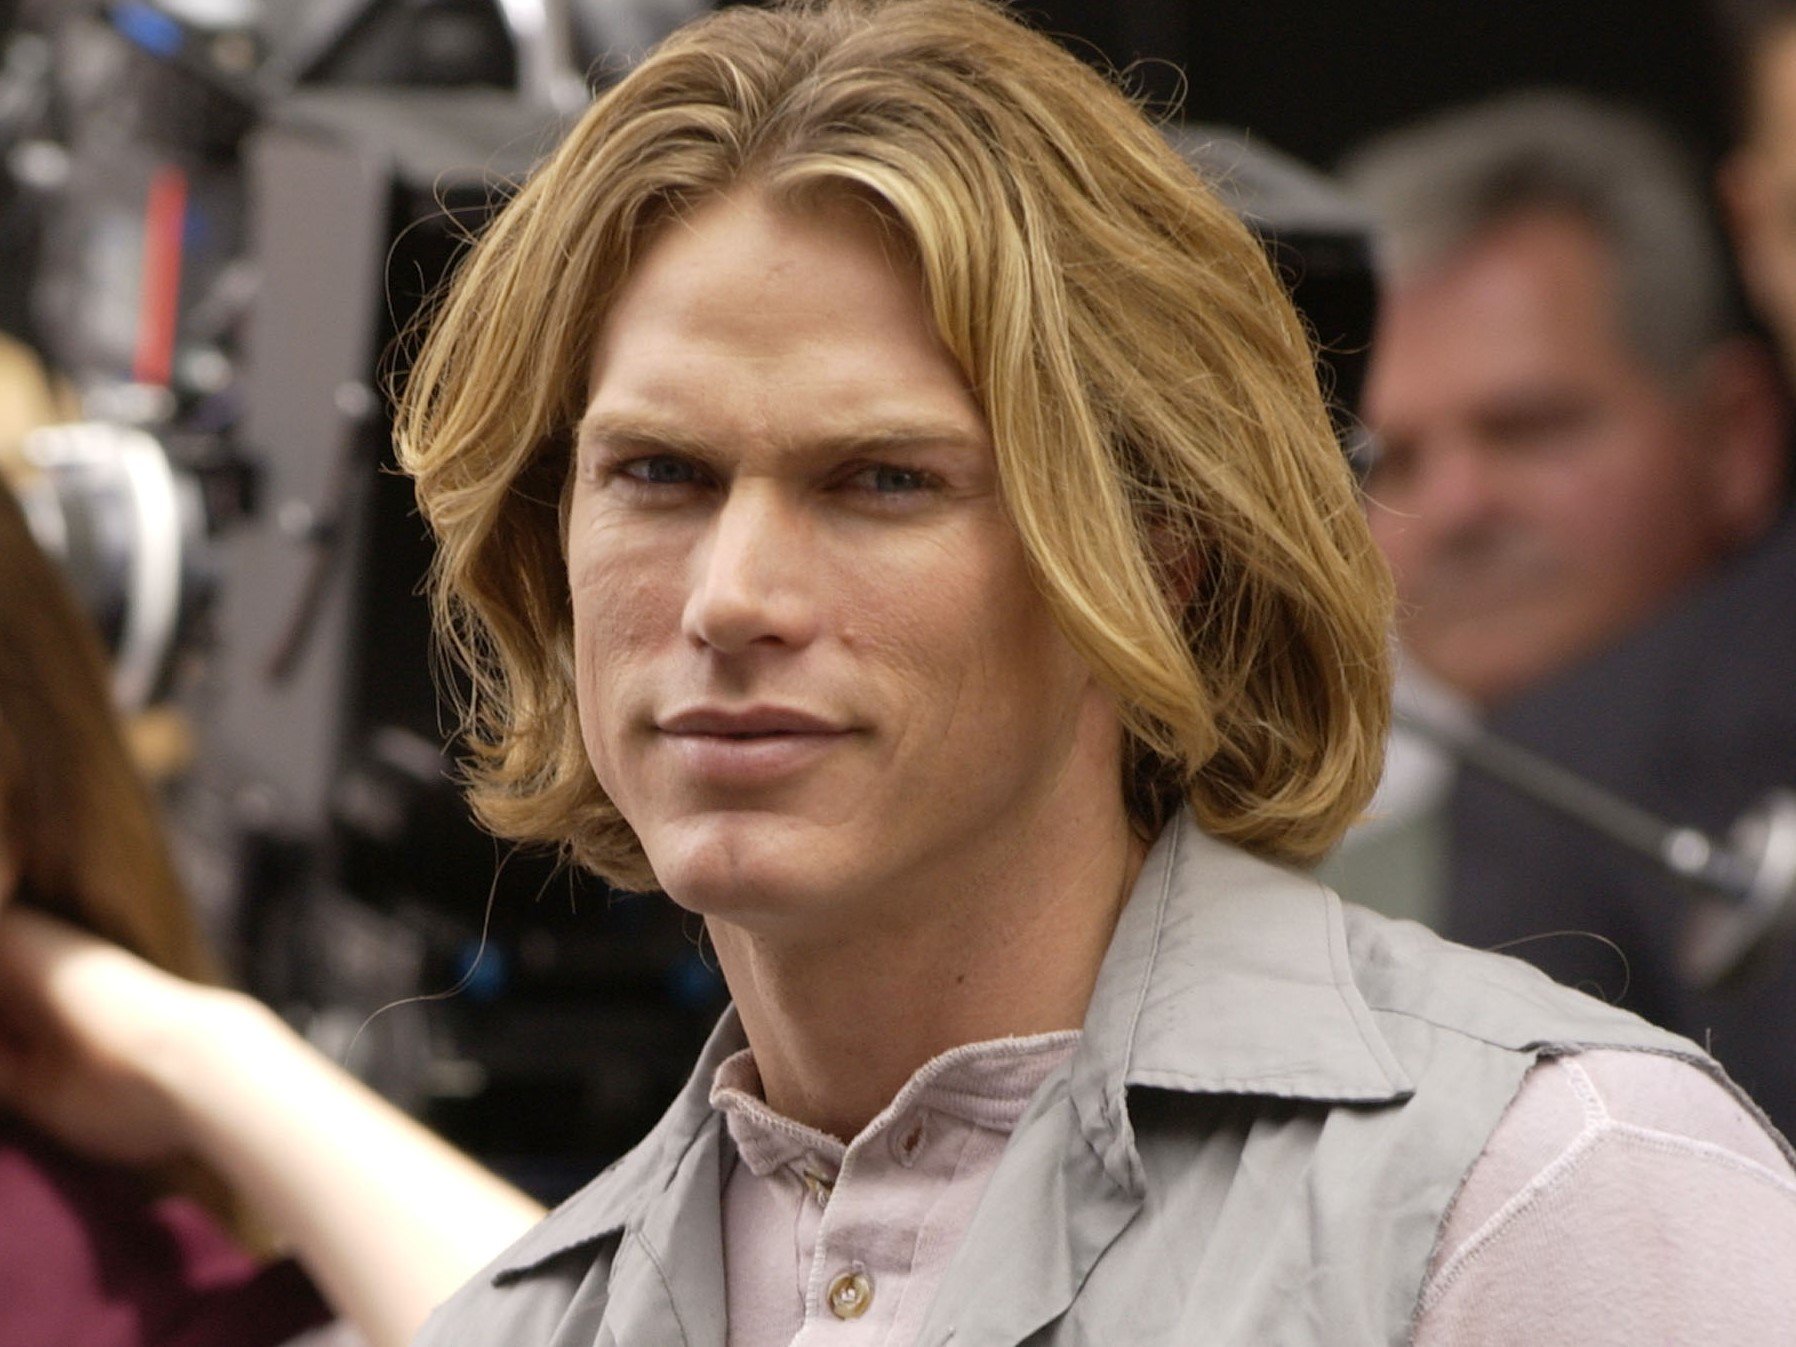 Jason Lewis as Smith Jerrod on 'Sex and the City'